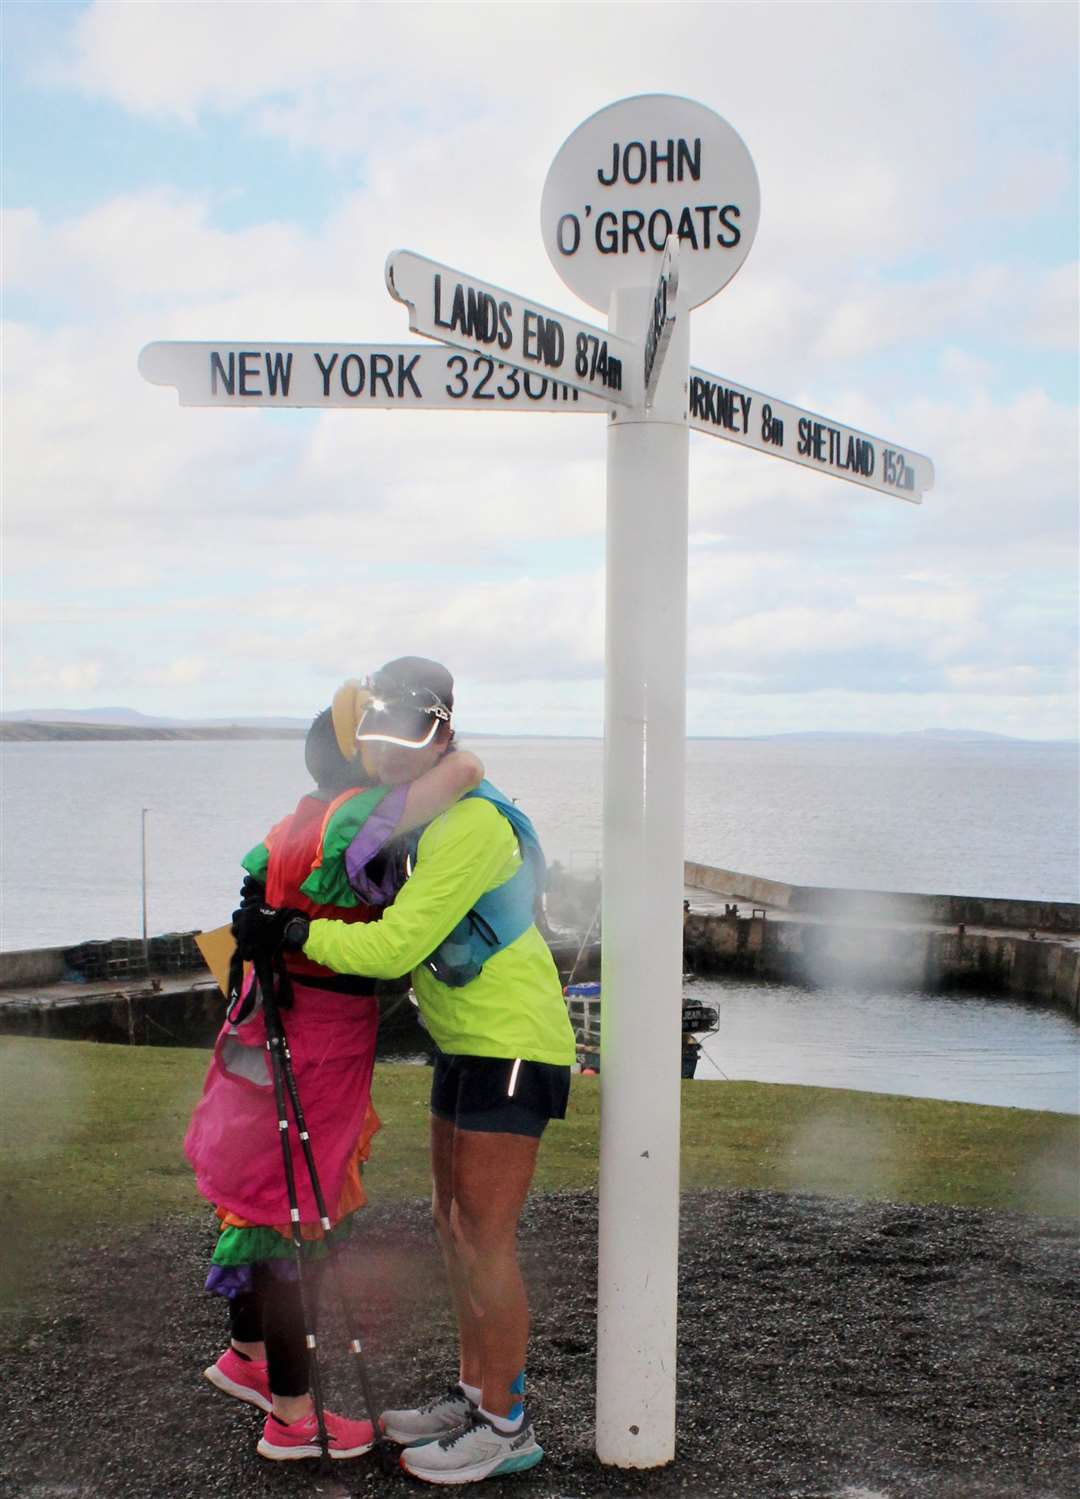 Sara is hugged by Kerry at the John O'Groats signpost after completing her end-to-end challenge. Picture: Eileen Bryant